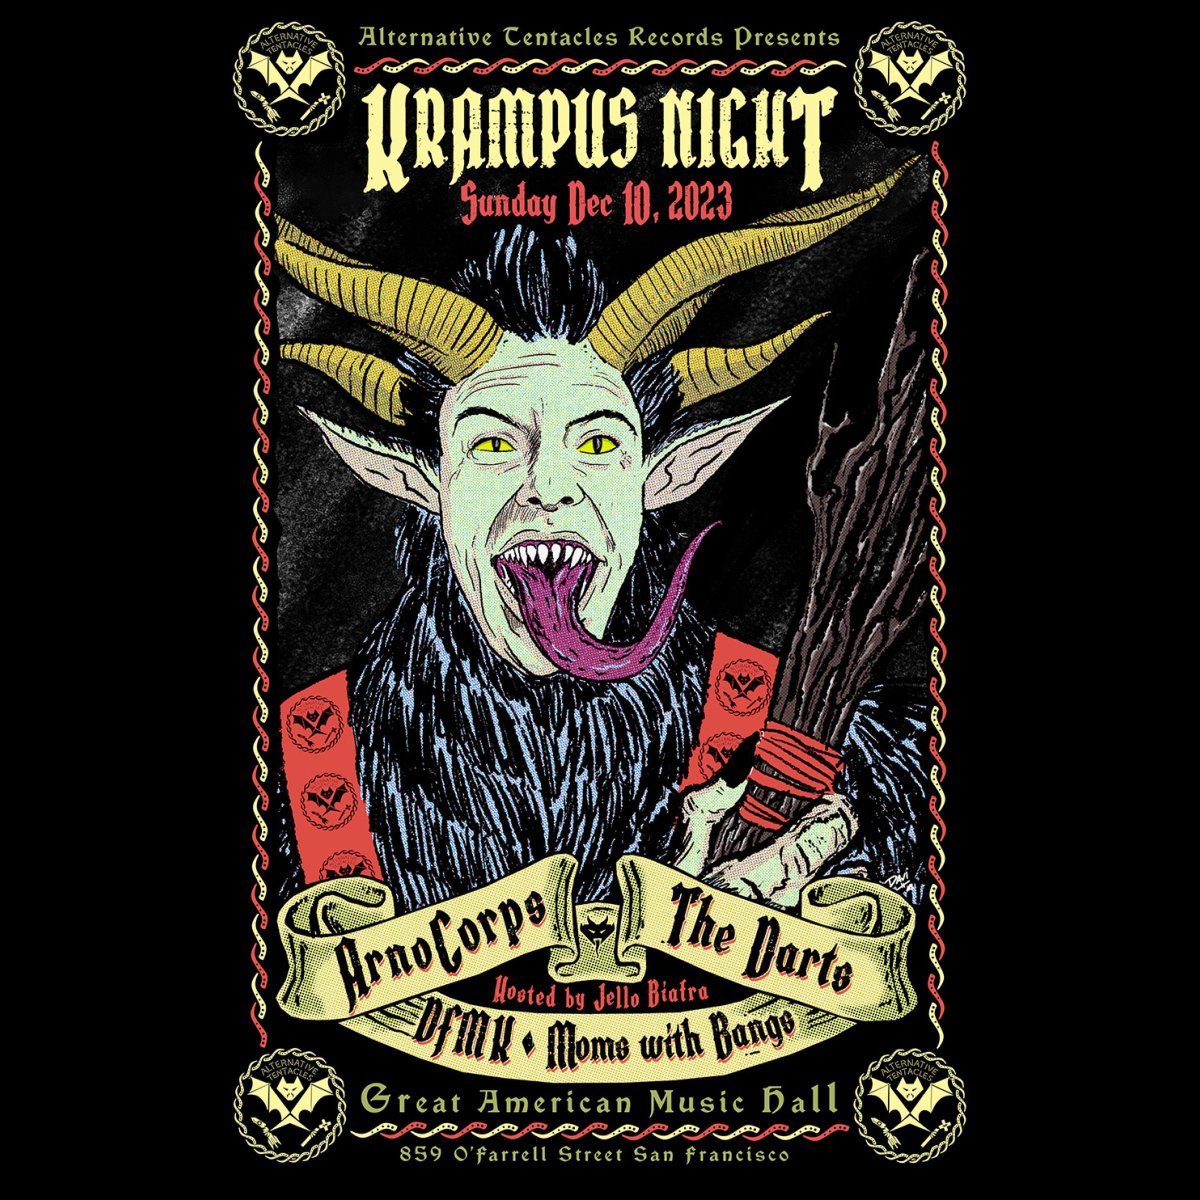 DFMK is playing Krampus Night! Catch them in San Francisco on Sunday, Dec. 10th at The Great American Music Hall with ArnoCorps, The Darts, and Moms With Bangs! Hosted by none other than Jello Biafra! Tickets on sale now at buff.ly/48YqWIe